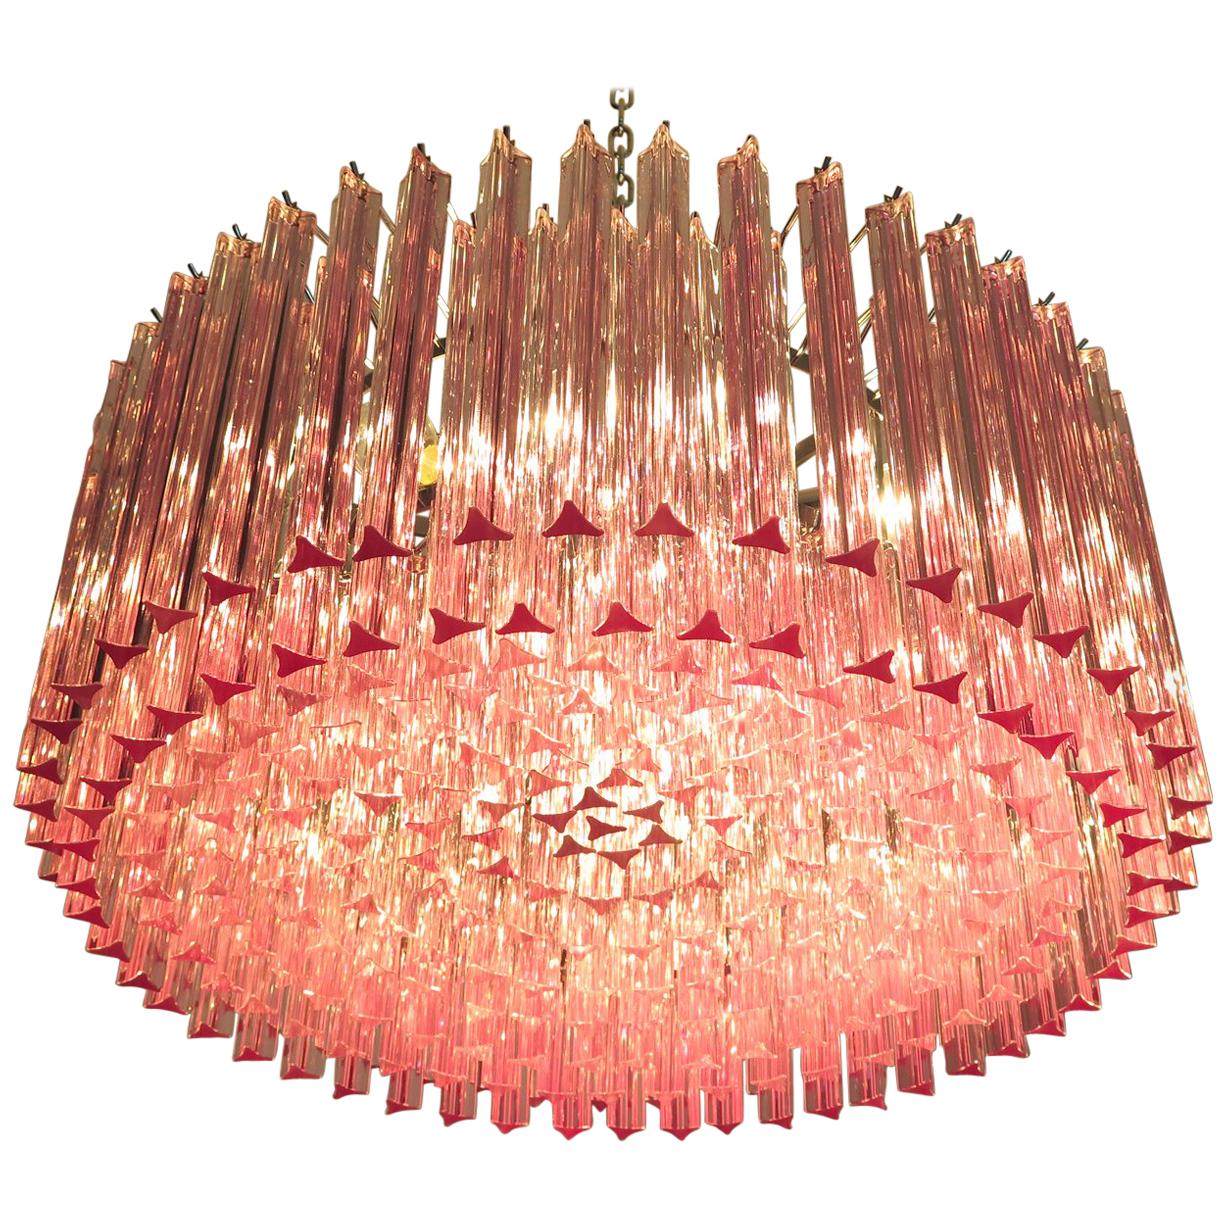 Triedri Murano glass chandelier, 265 pink prism
A magnificent Murano glass chandelier, 265 pink triedri on crome frame. This large midcentury Italian chandelier is truly a timeless Classic.
Period: late 20th century
Dimensions: 43.30 inches (110